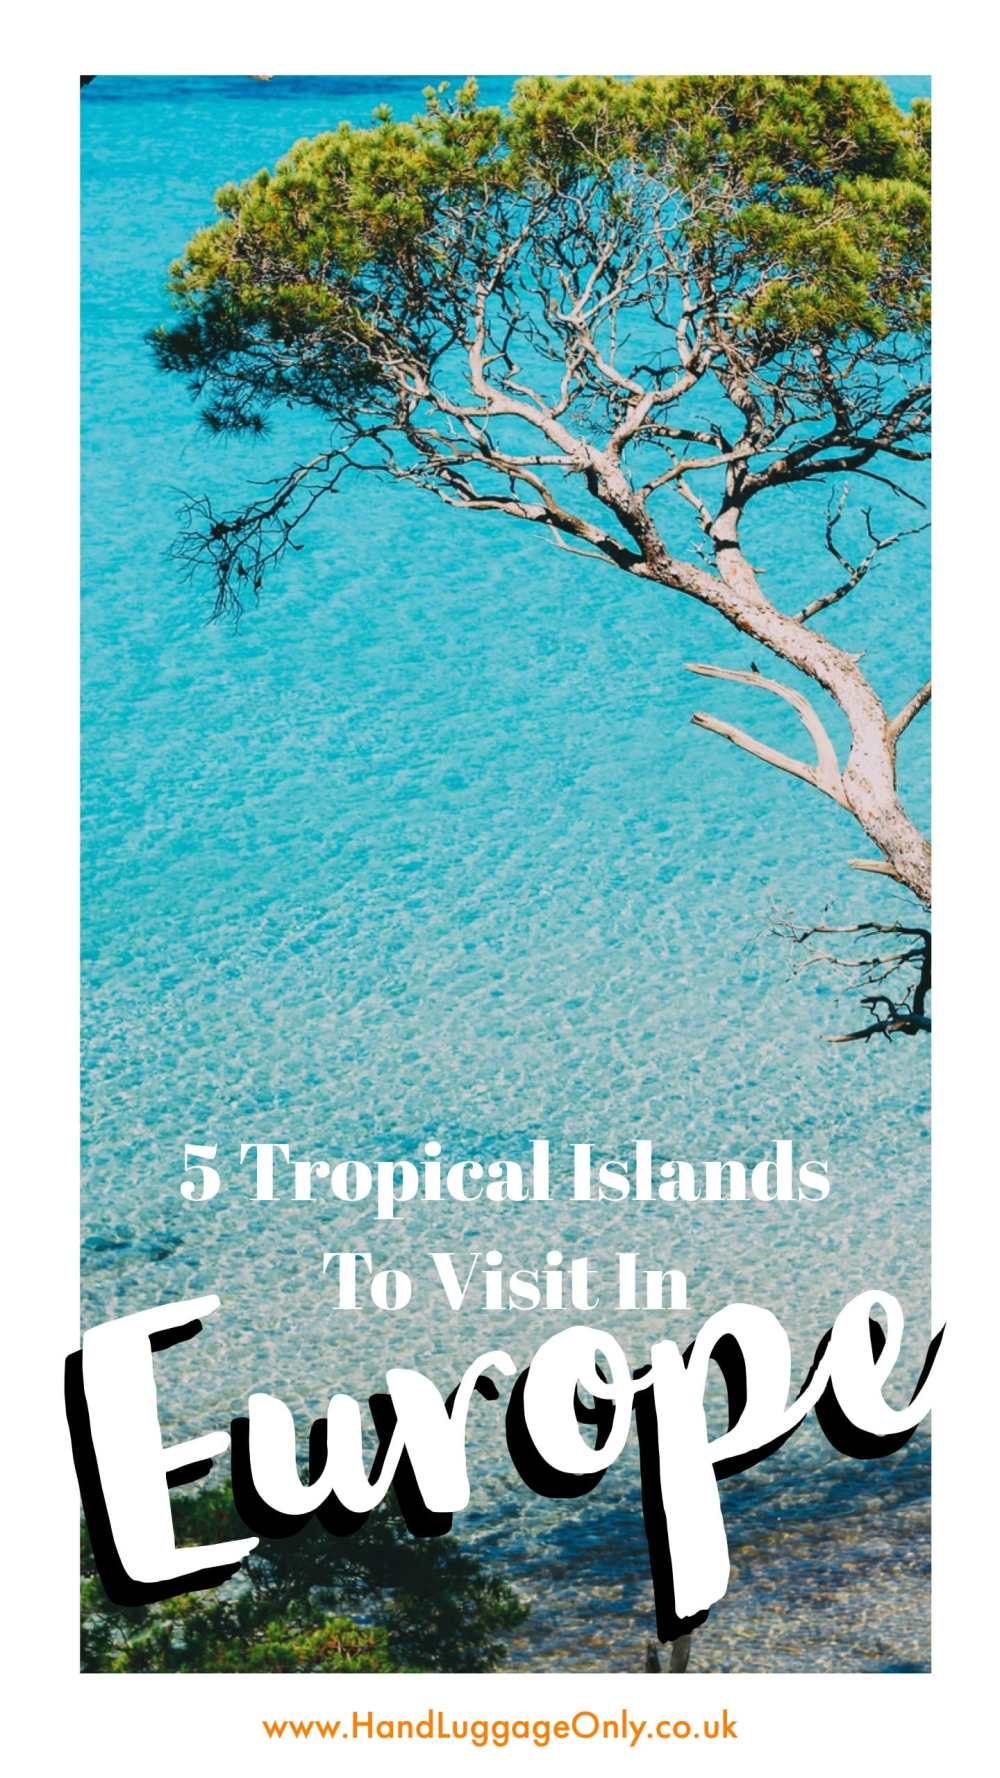 5 Surprisingly Tropical Islands To Visit In Europe (1)